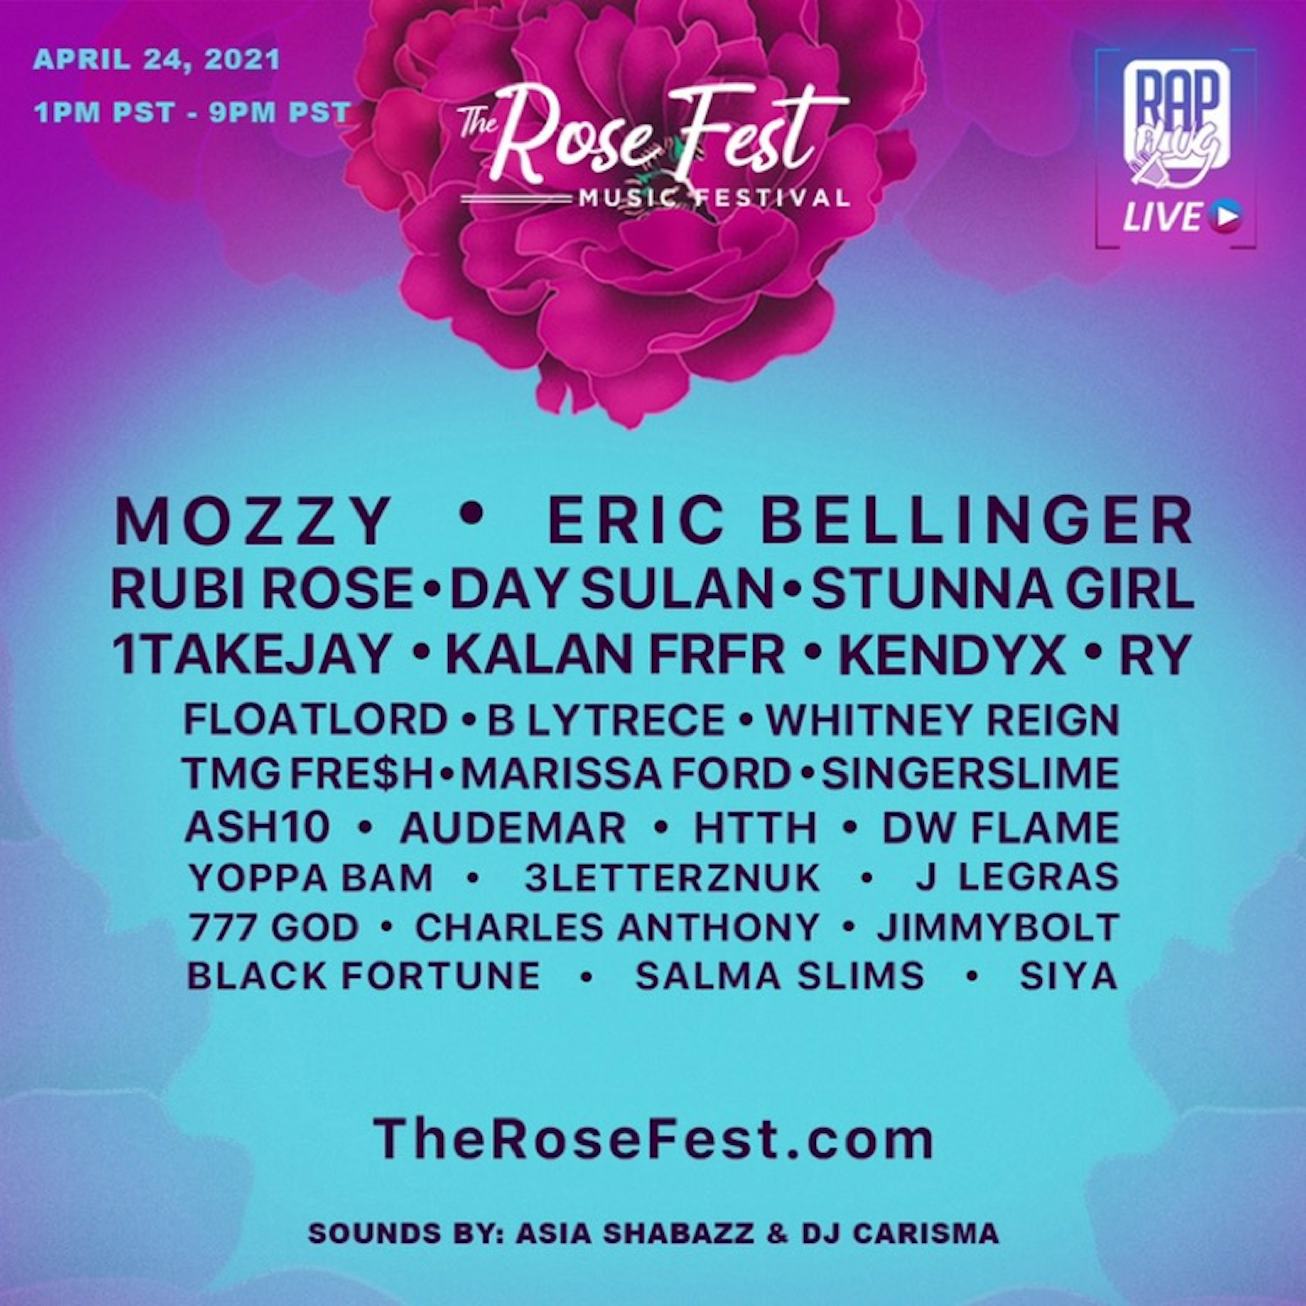 The lineup flyer for The Rose Fest.